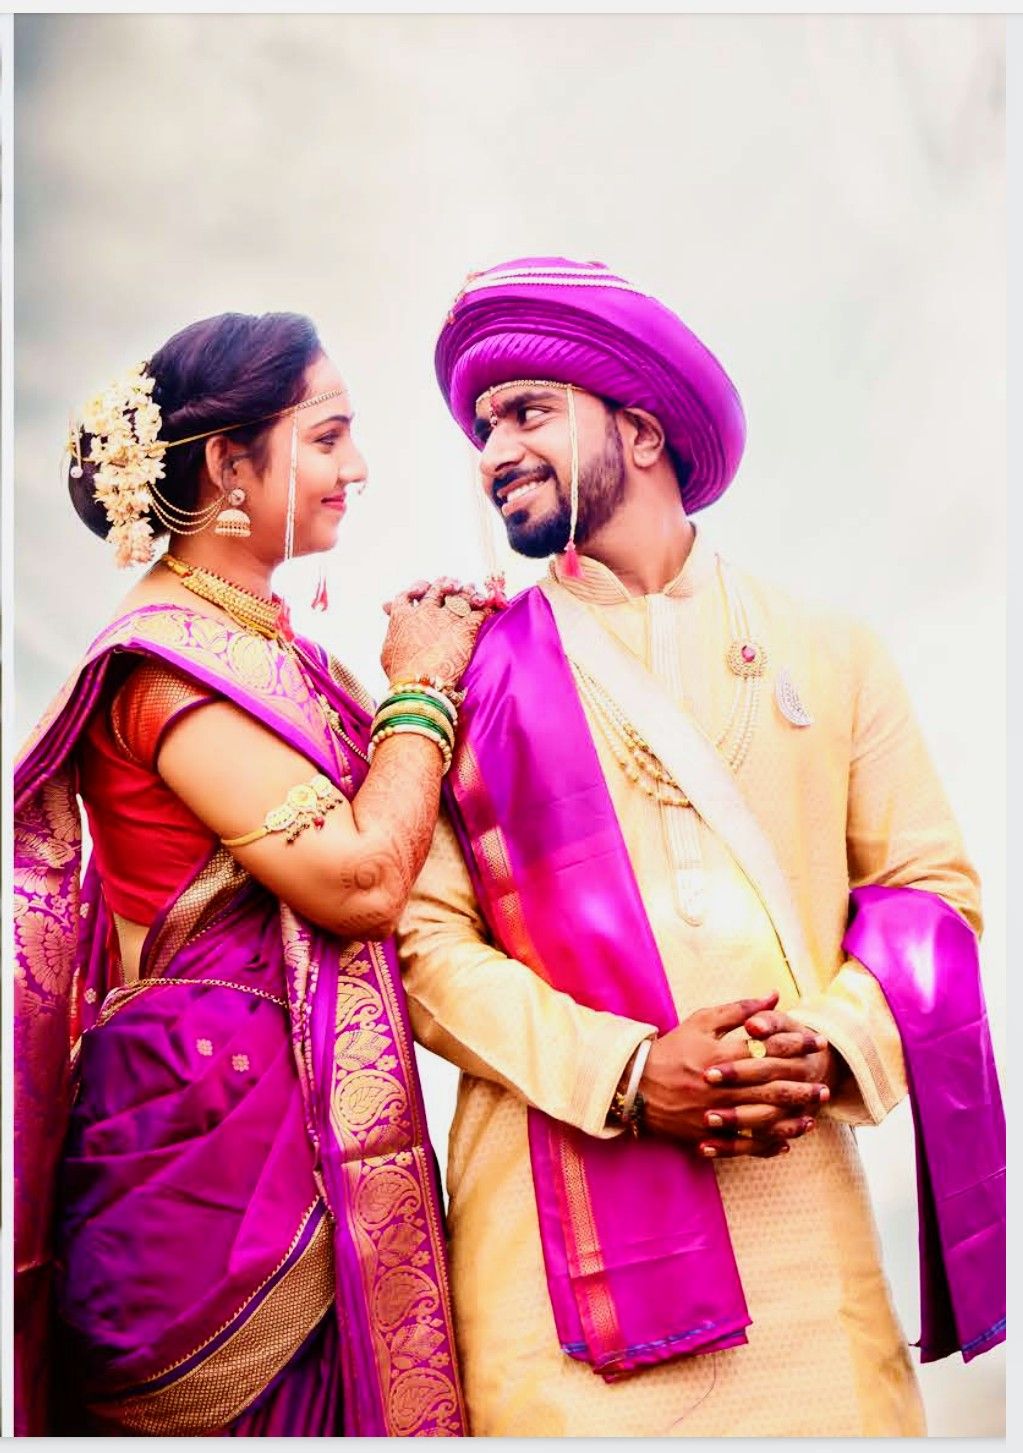 A look at Siddharth and Mitali's dream wedding | Times of India